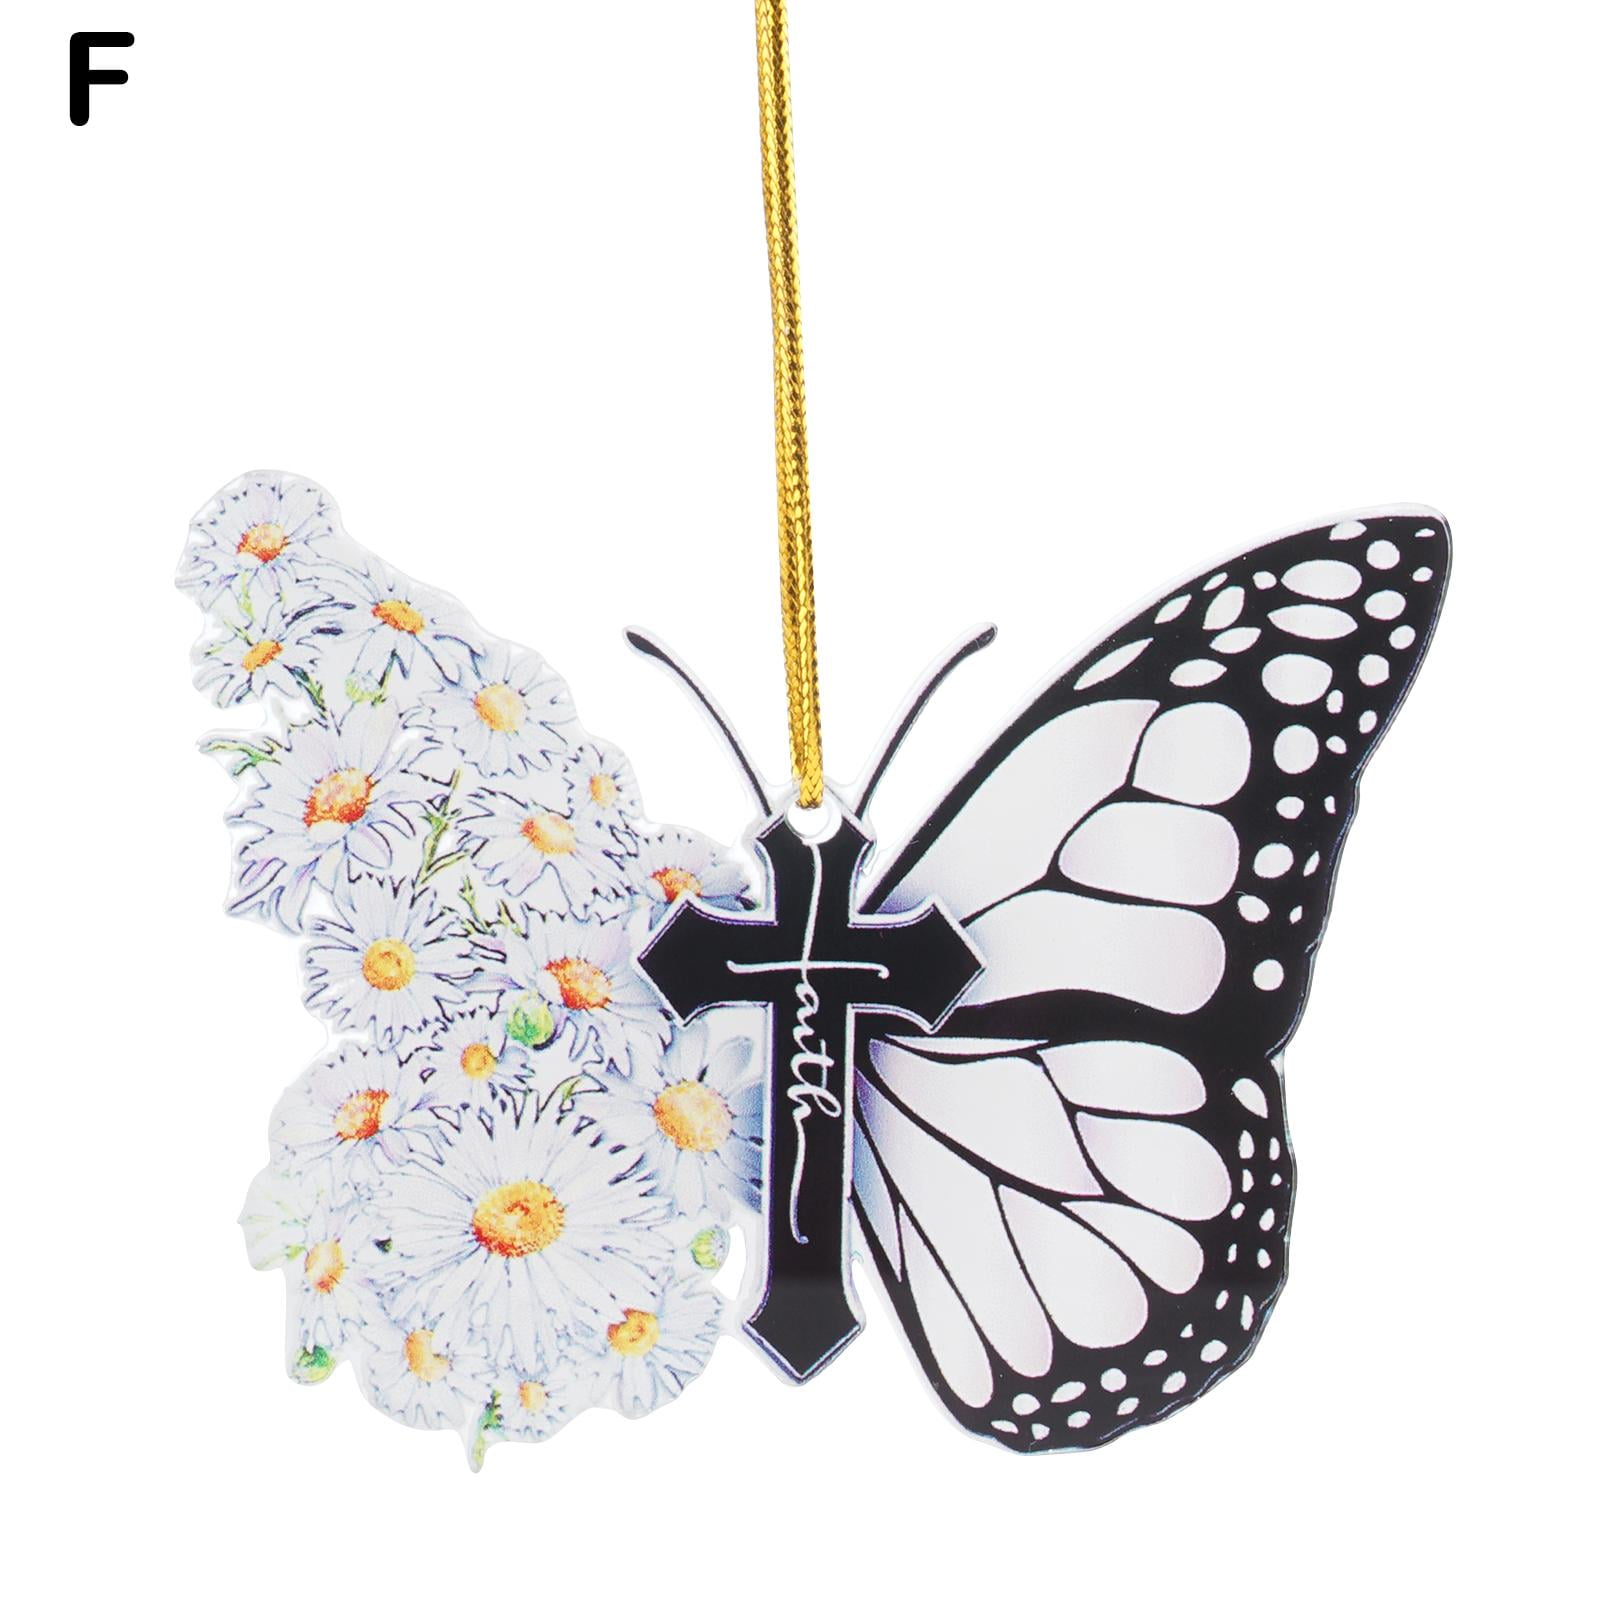 BUTTERFLY double Sided Car Charm Car Accessories Rear View -   Car  charms, Car rearview mirror accessories, Car rear view mirror